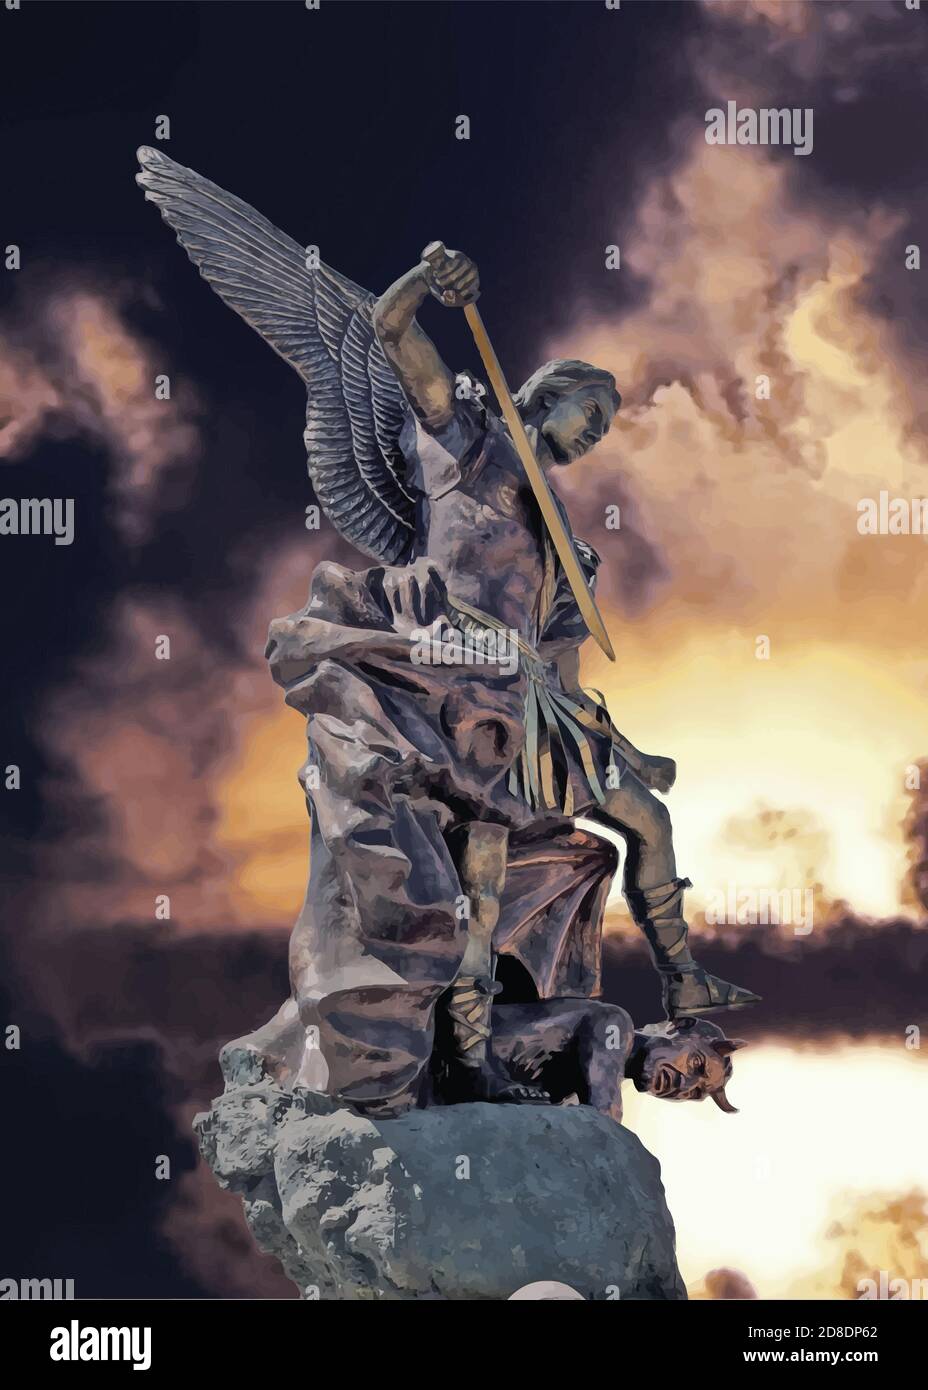 Digital painting of a statue depicting Saint Michael Archangel defeating the forces of Lucifer in the War in Heaven.  Original photo and painting by L Stock Vector